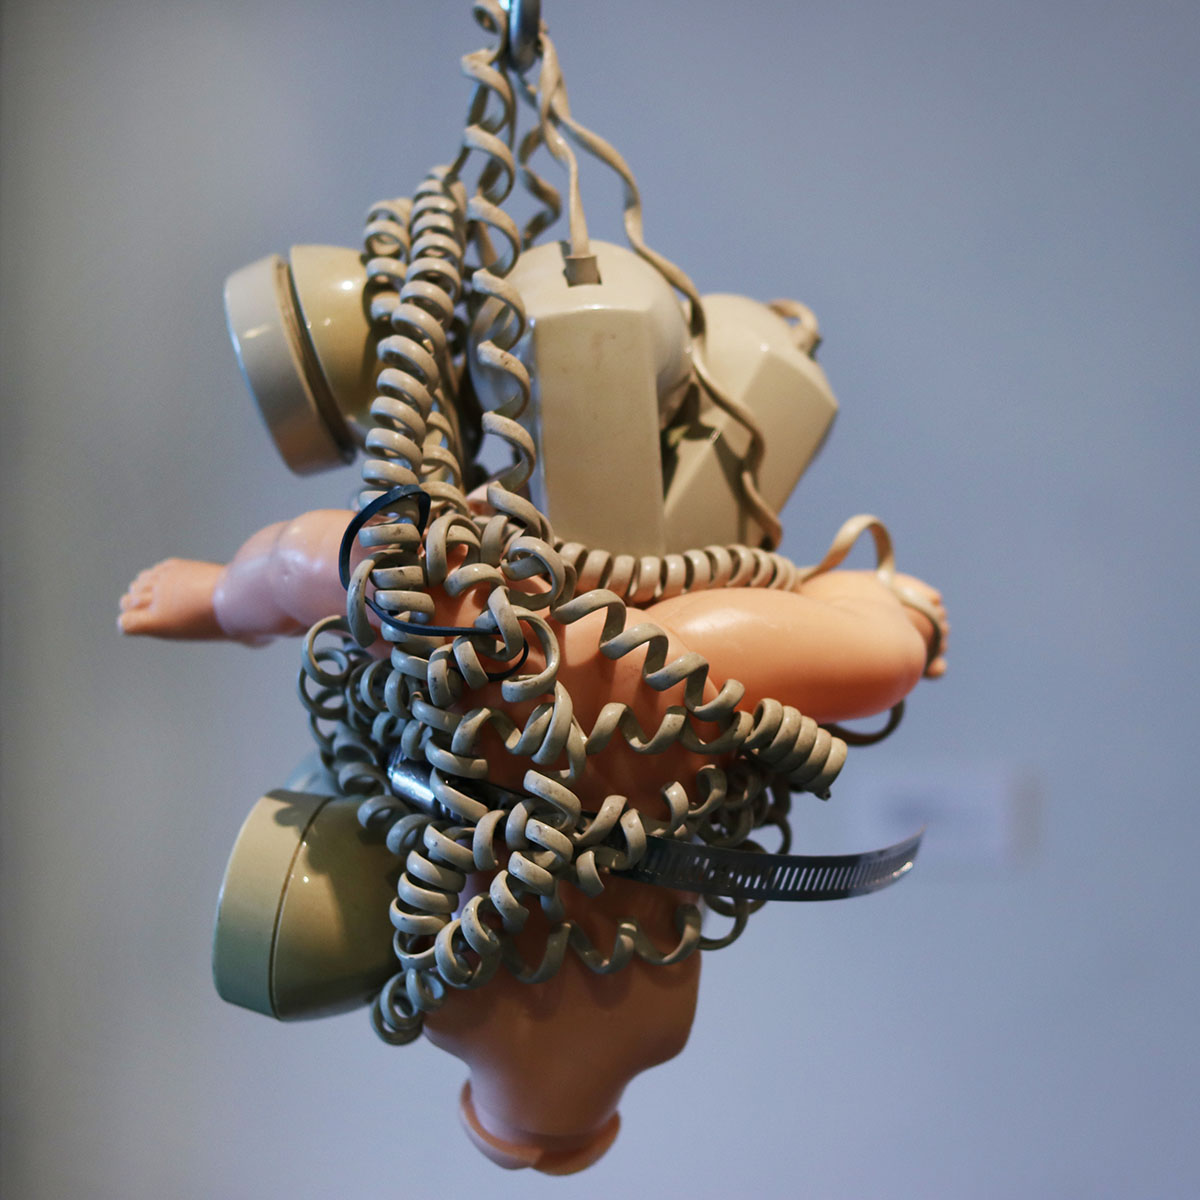 A hanging sculpture of doll arms tangled in phone wires and phones heads.